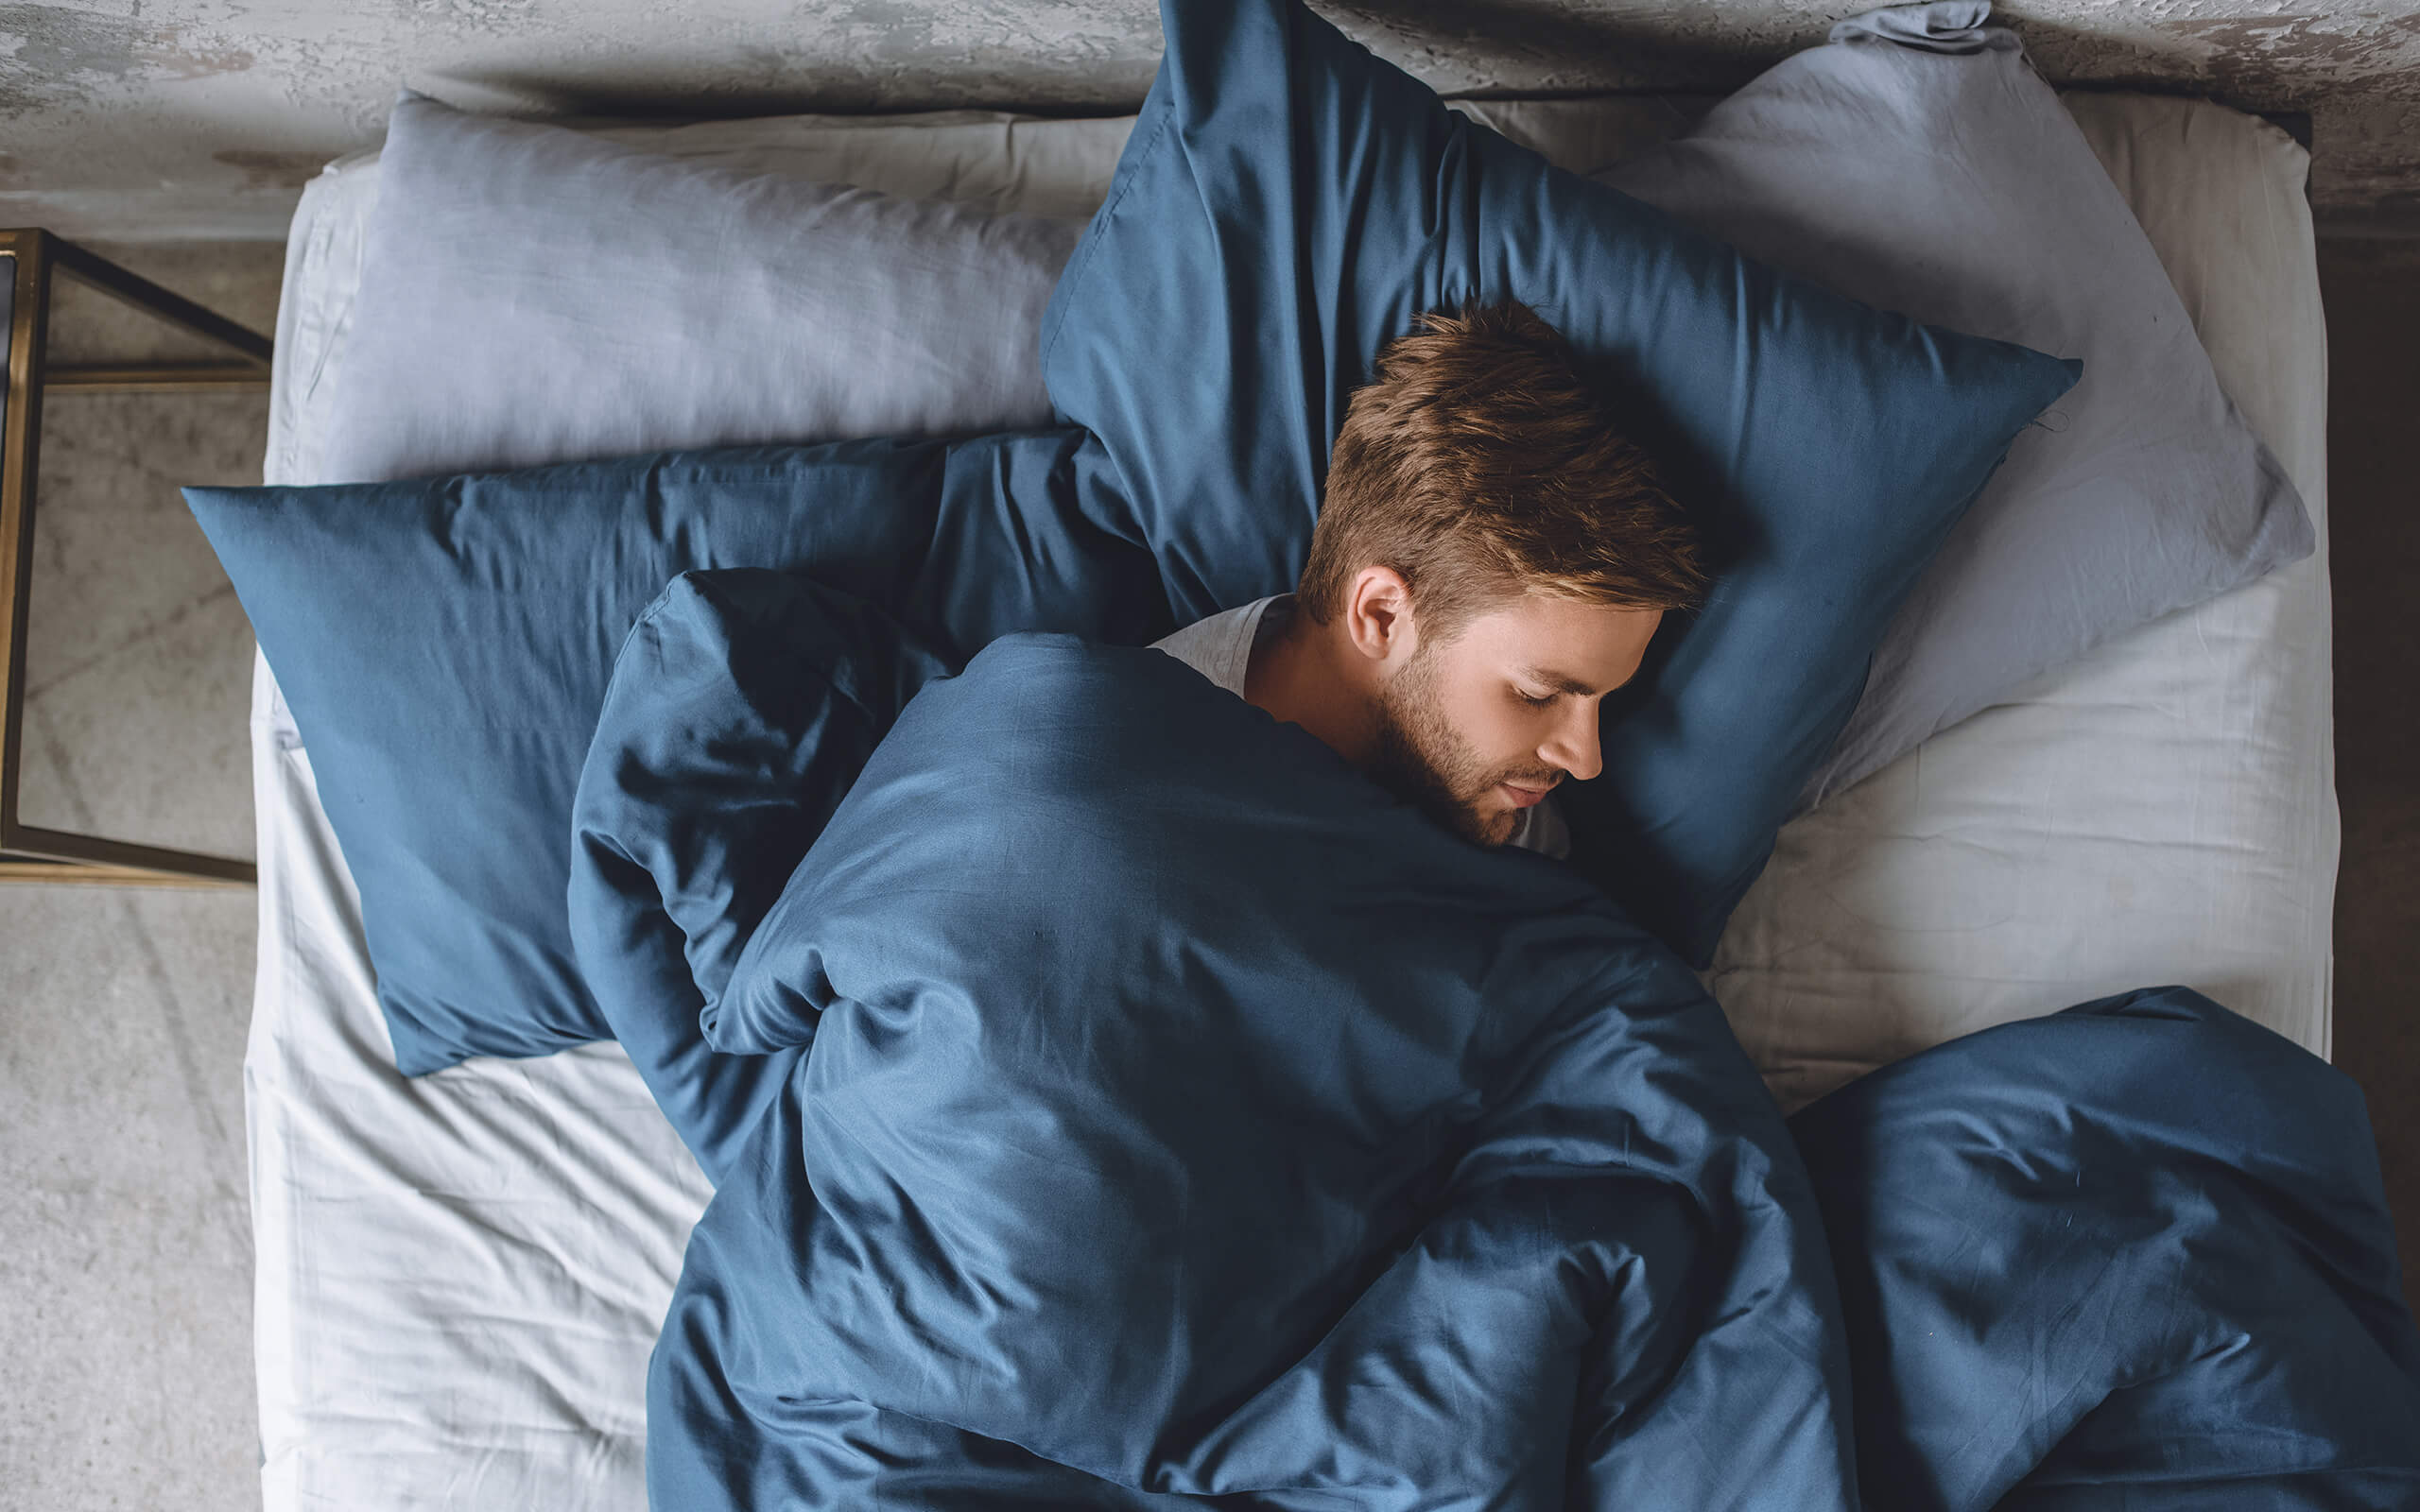 Your workers sleep in quiet, private rooms on comfortable mattresses with 250-thread-count linens. We coordinate occupancy by sleep cycles, putting night shift workers in the same wings